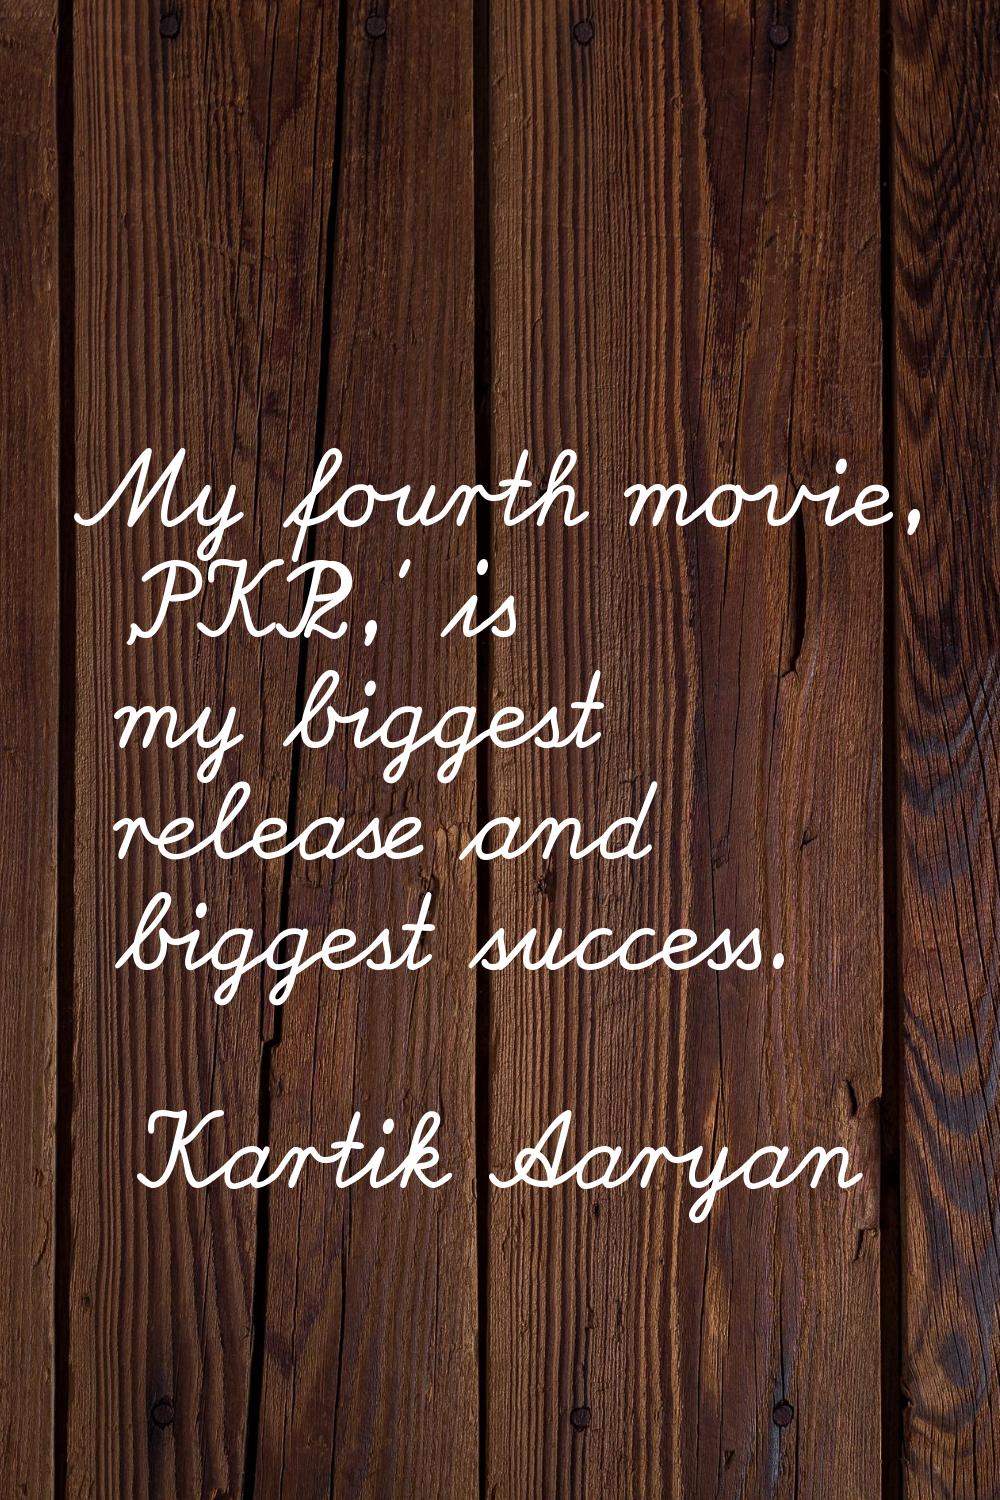 My fourth movie, 'PKP2,' is my biggest release and biggest success.